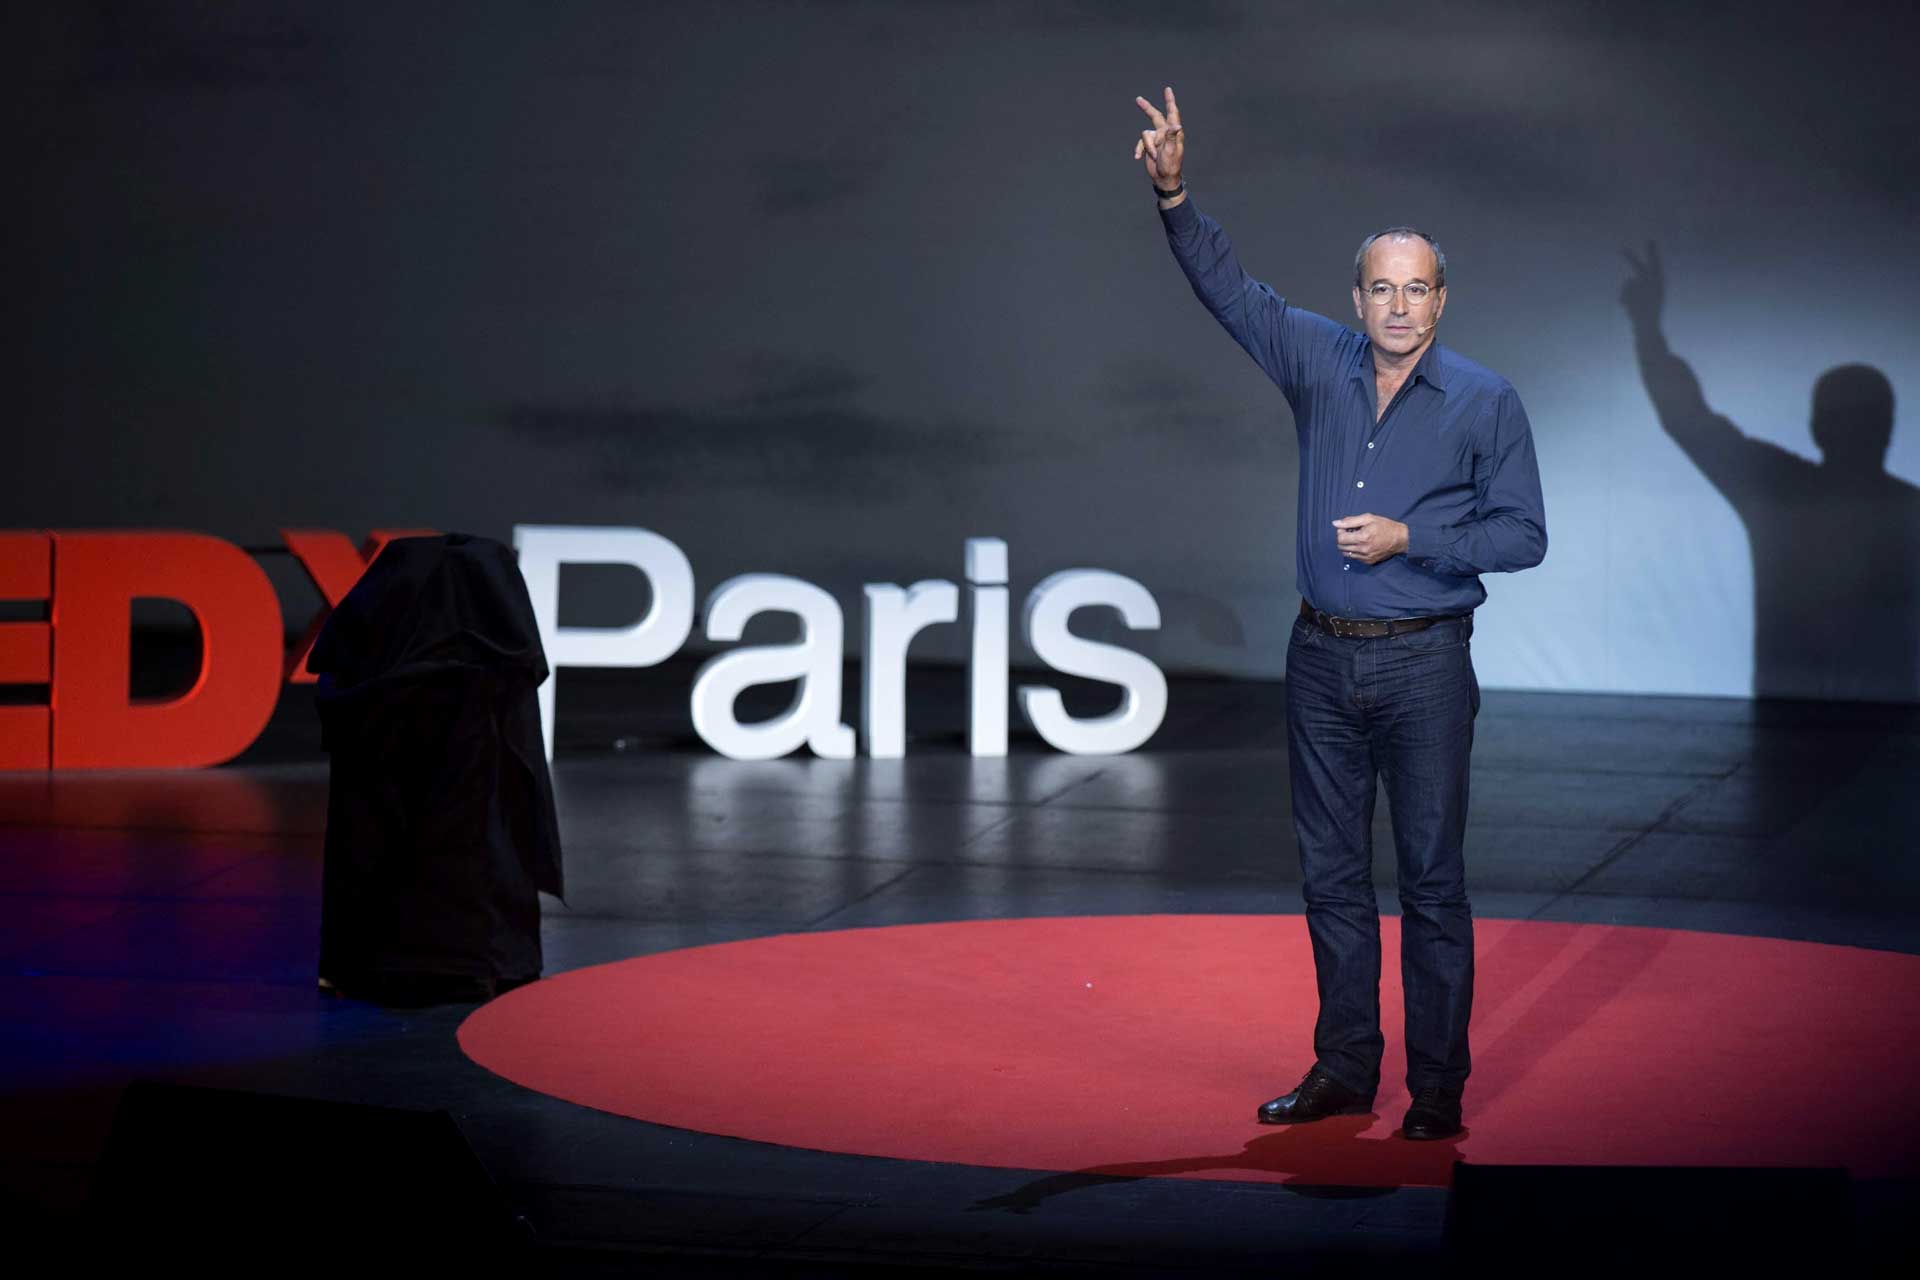 conference-TEDxParis-2014-13.jpg